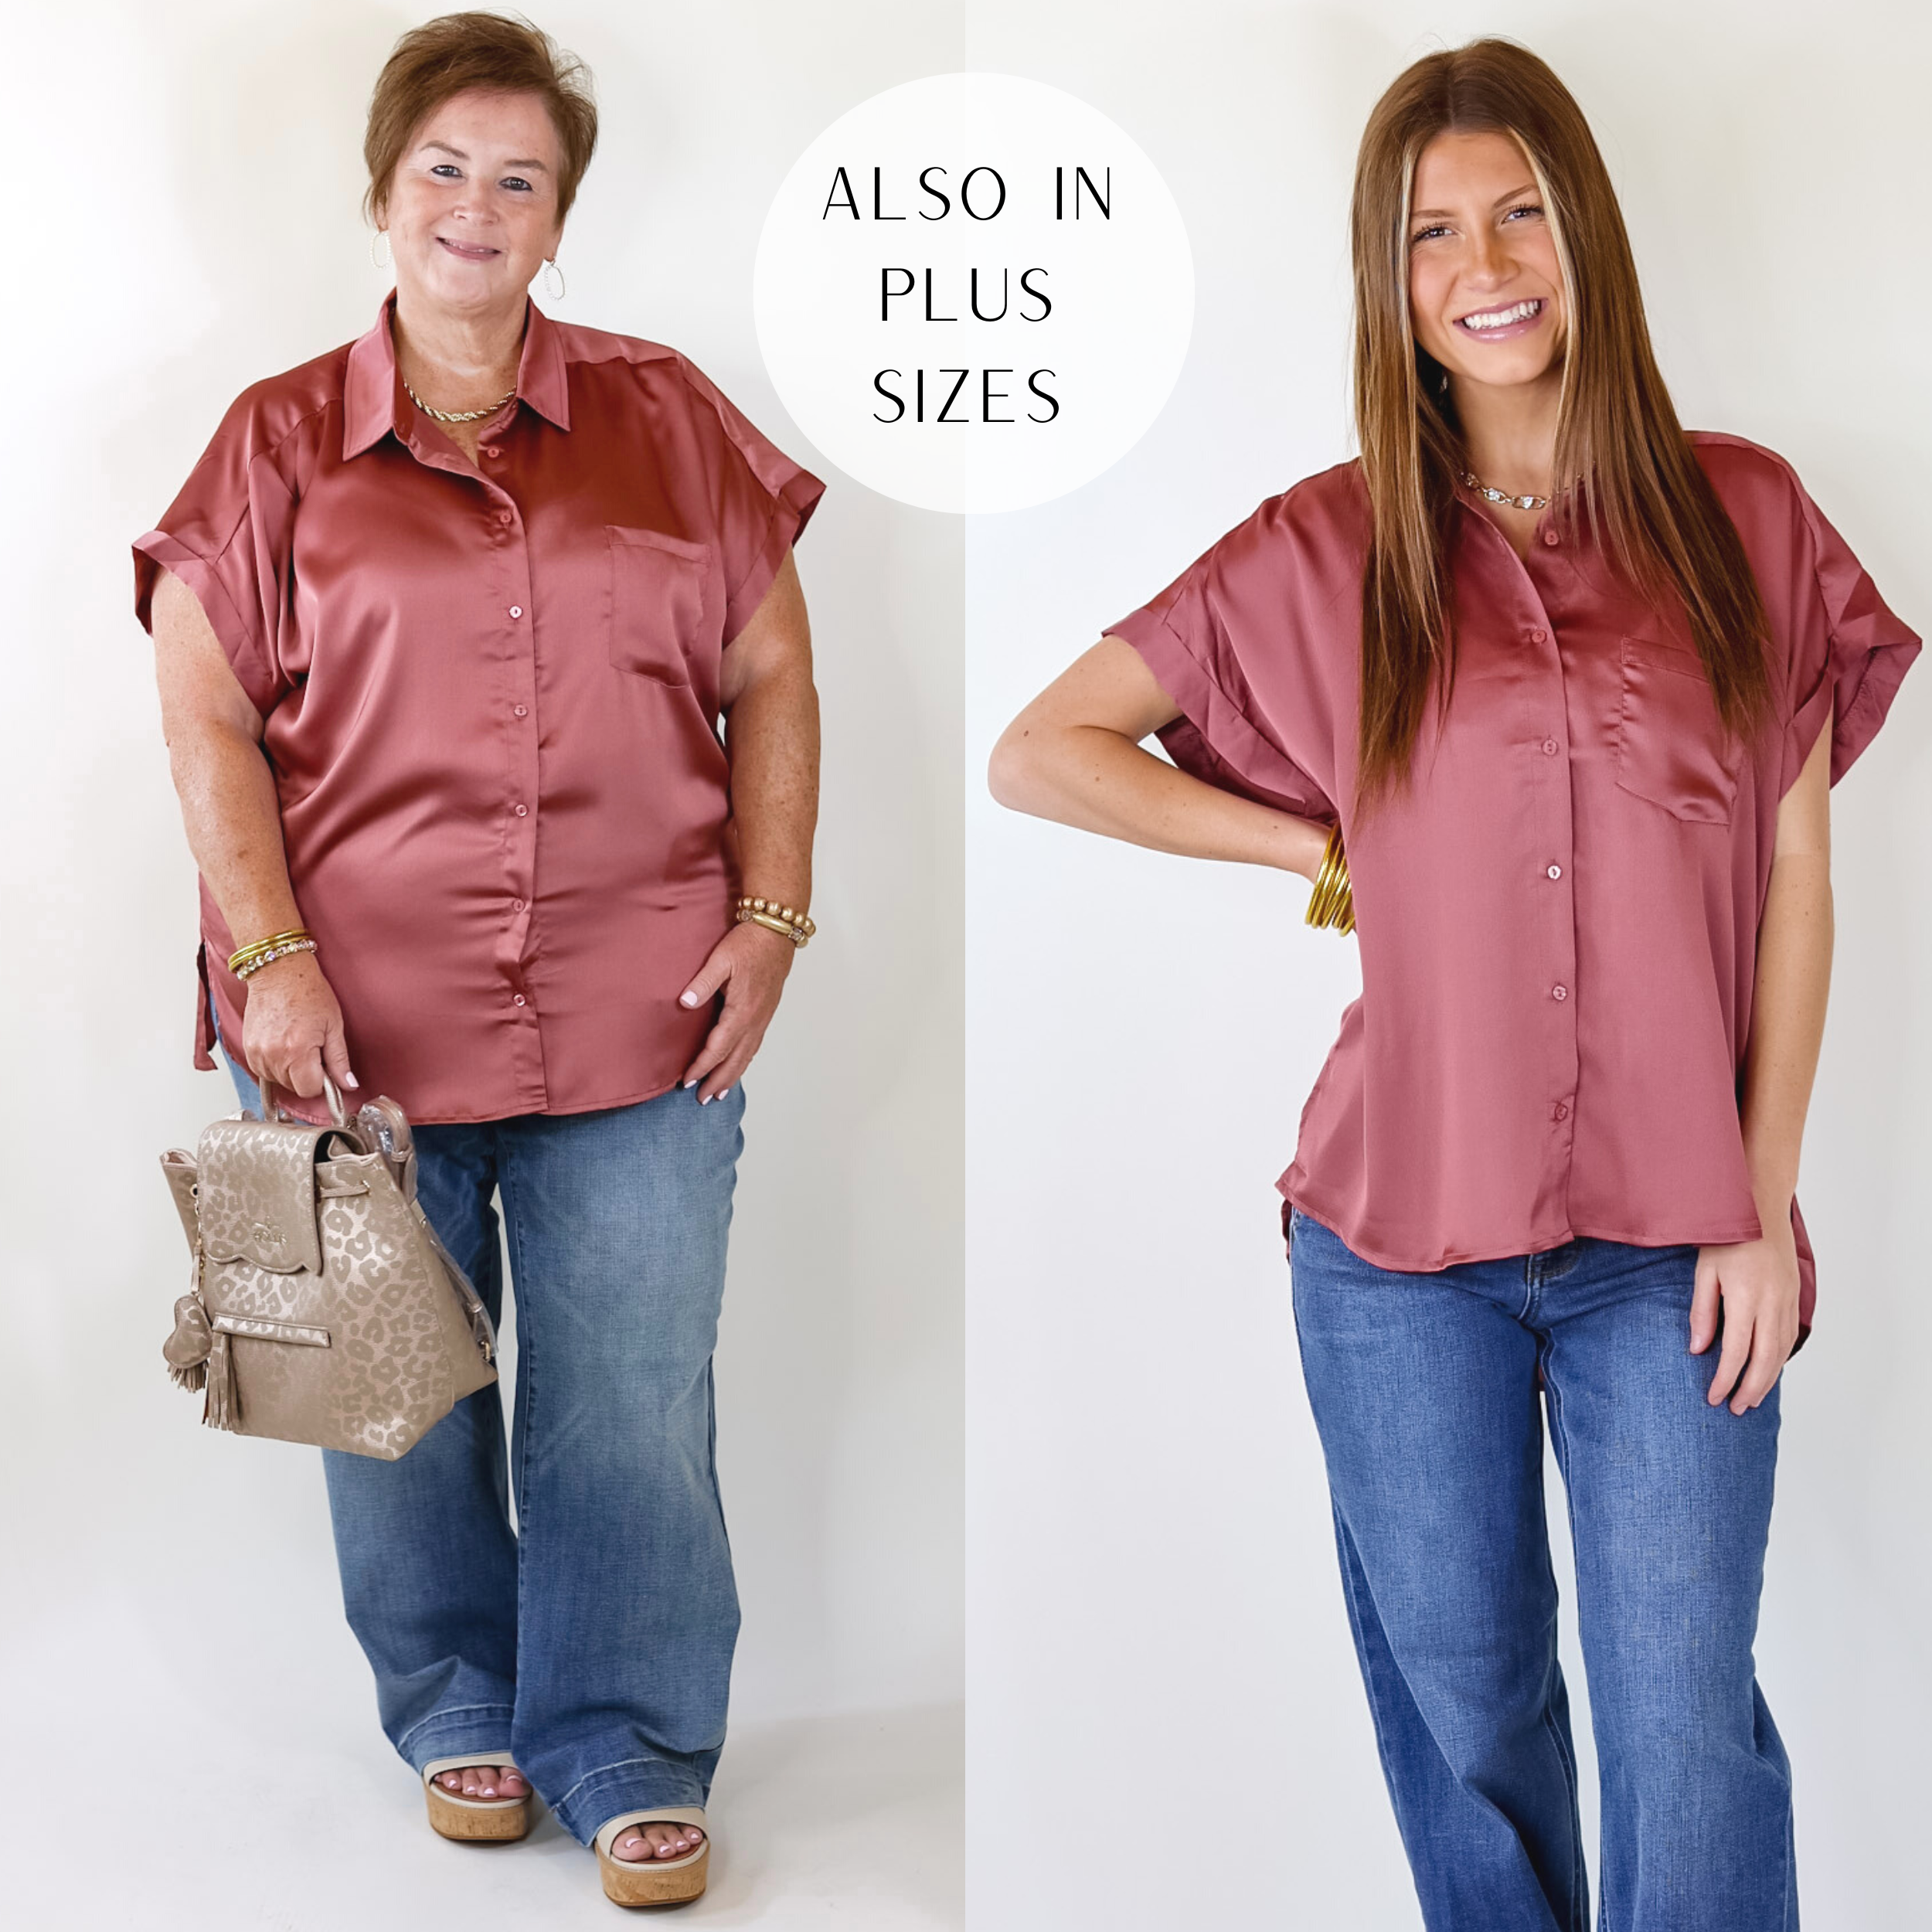 Models are wearing a mauve pink button up top with short sleeves and a collared neckline. Model has it paired with denim jeans, gold jewelry, and a leopard print bag.